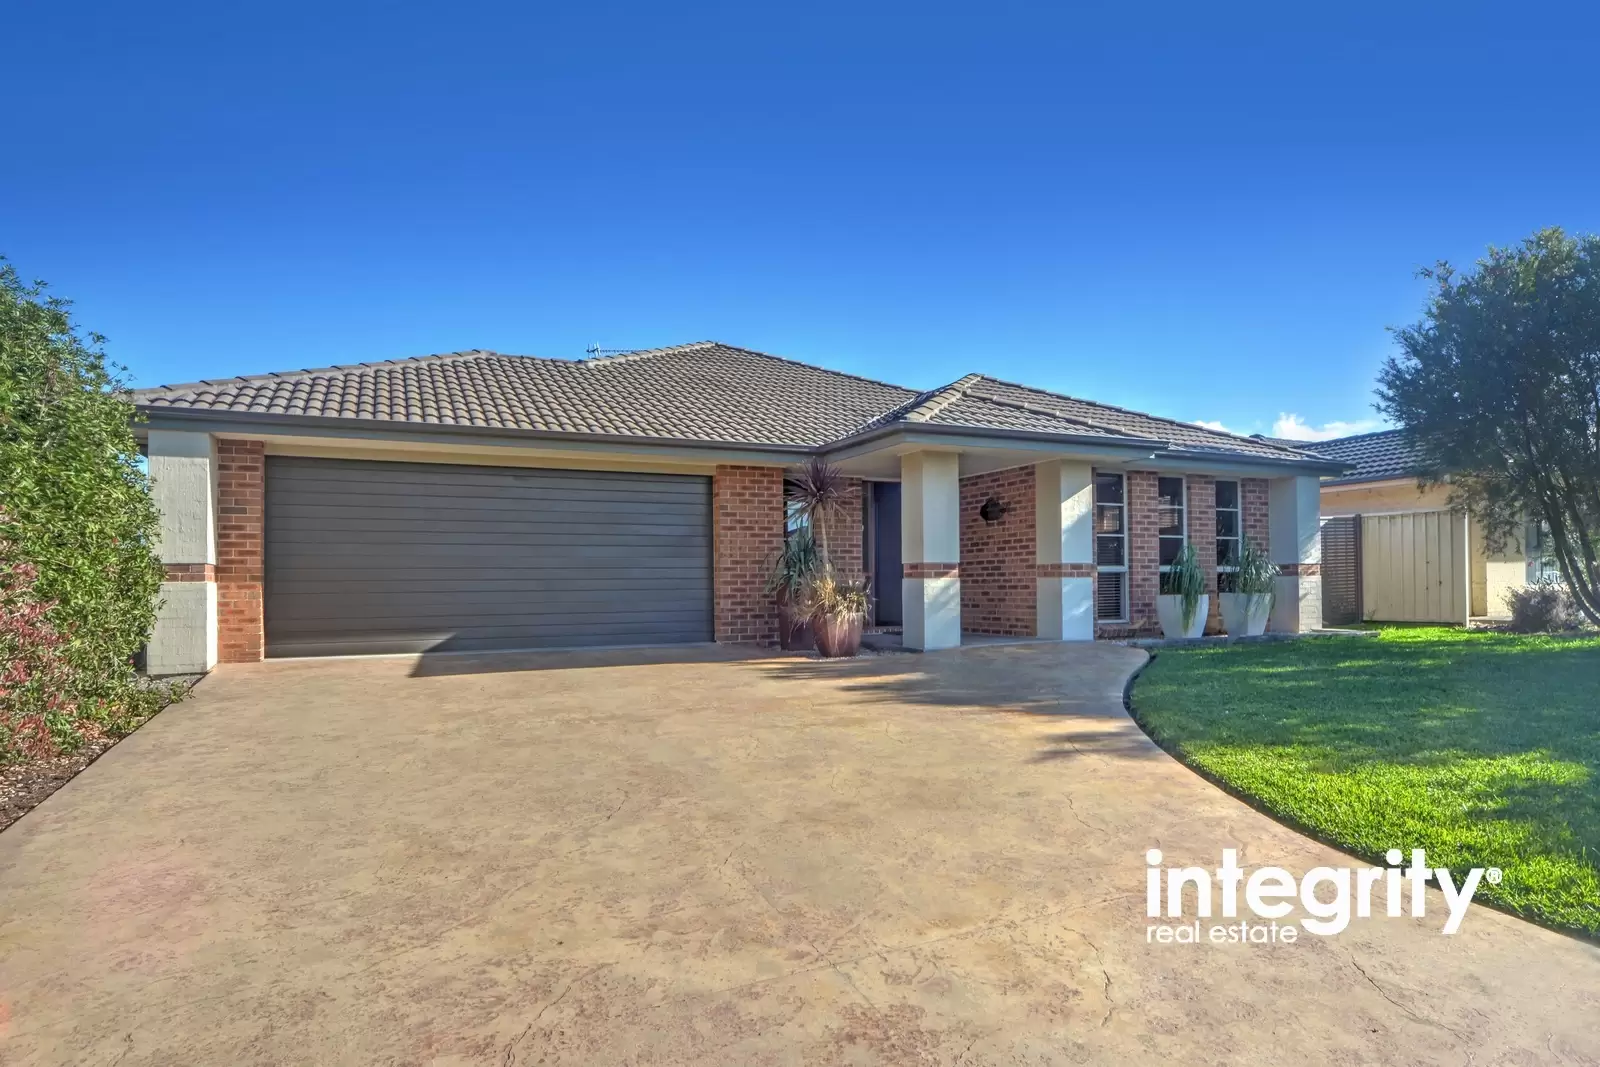 10 Gumnut Way, North Nowra Sold by Integrity Real Estate